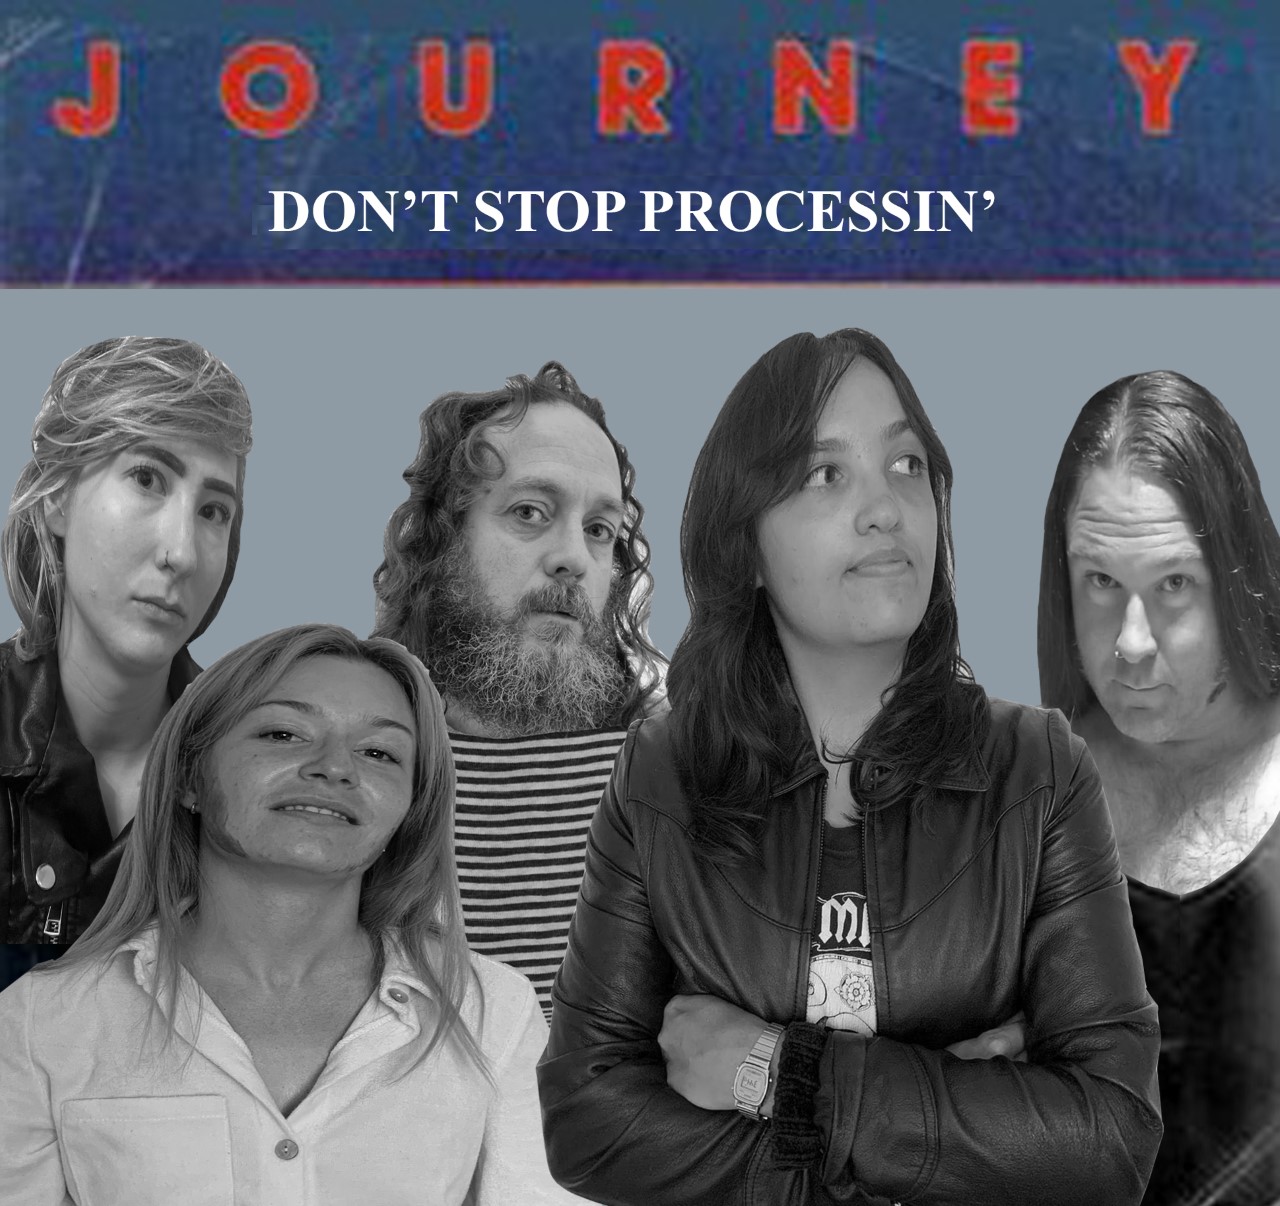 A very convincing photoshopped edit of Journey's 'Don’t Stop Believin' album cover. The ASE staff replace the original band members.